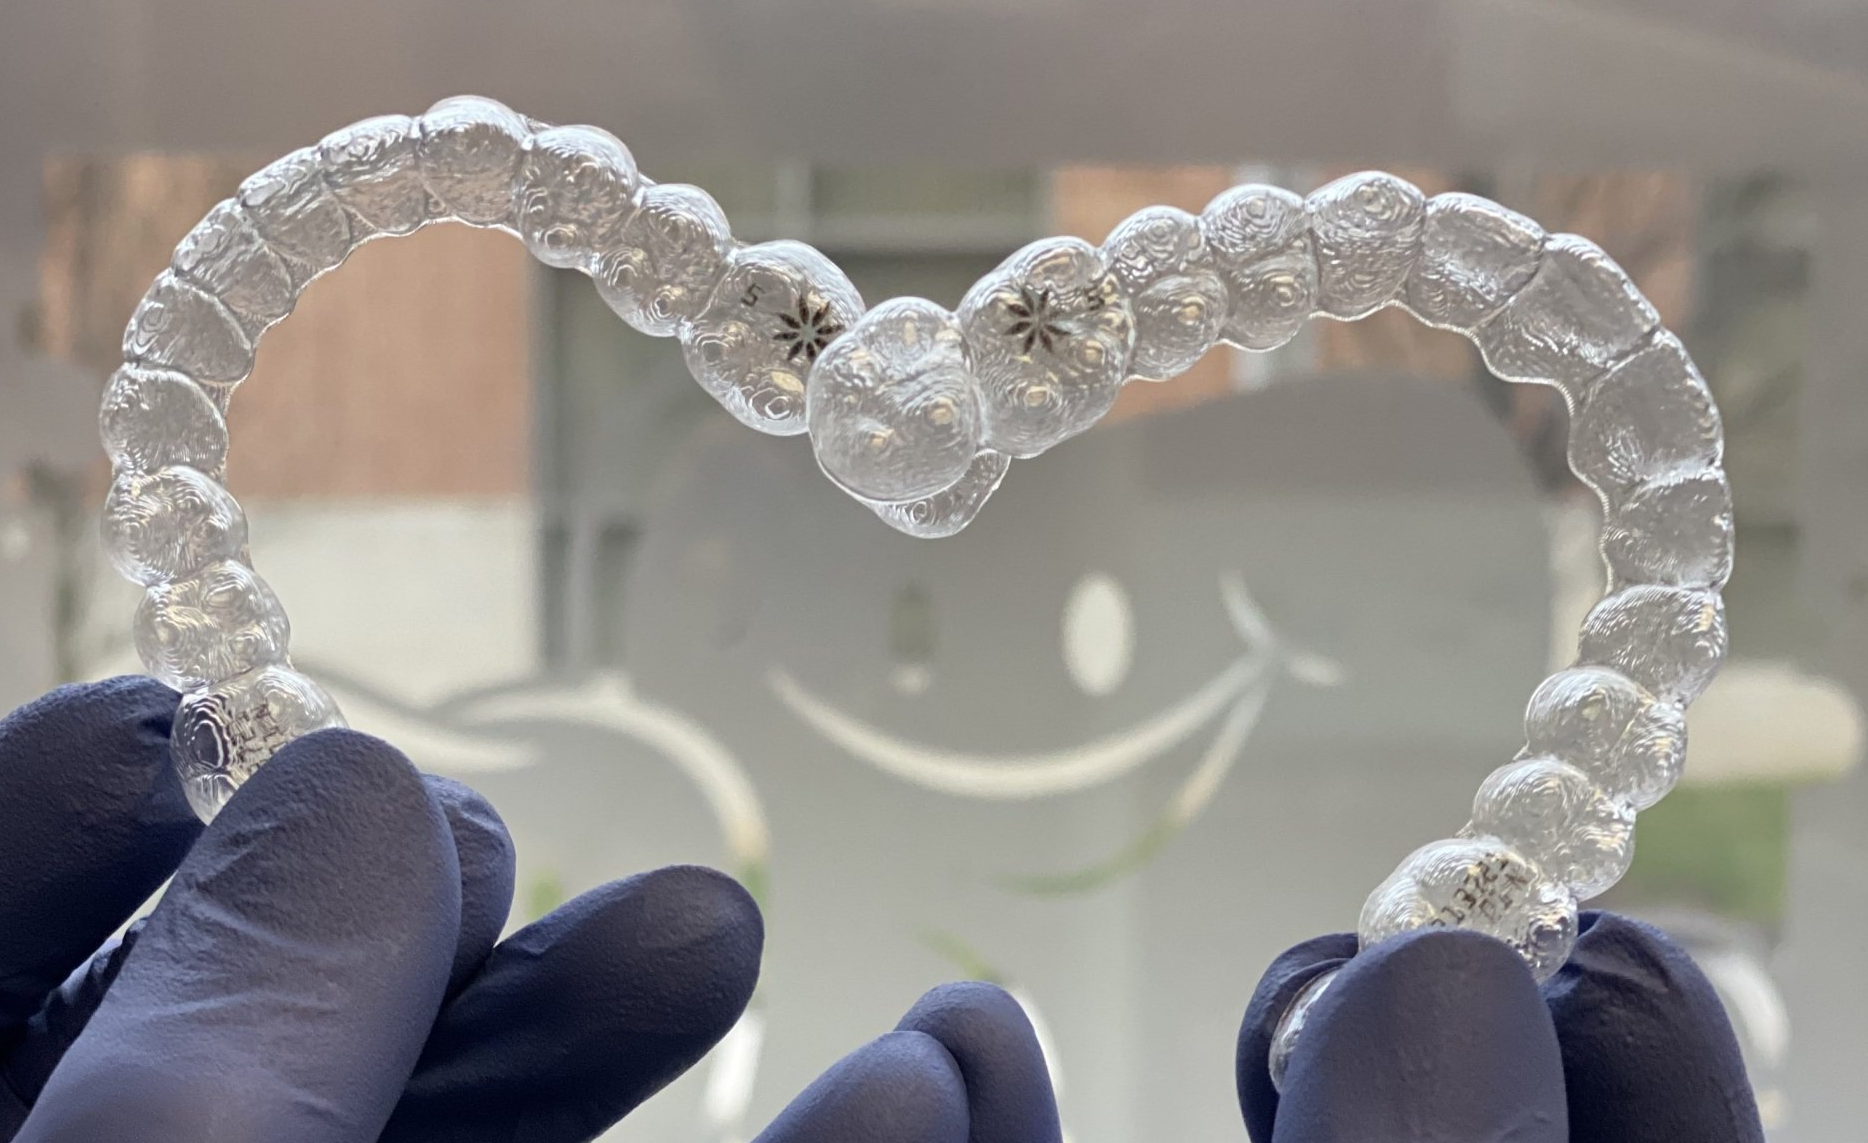 Clear aligners from Invisalign being held up to the window at Nurture Dental Health in Allentown, PA.